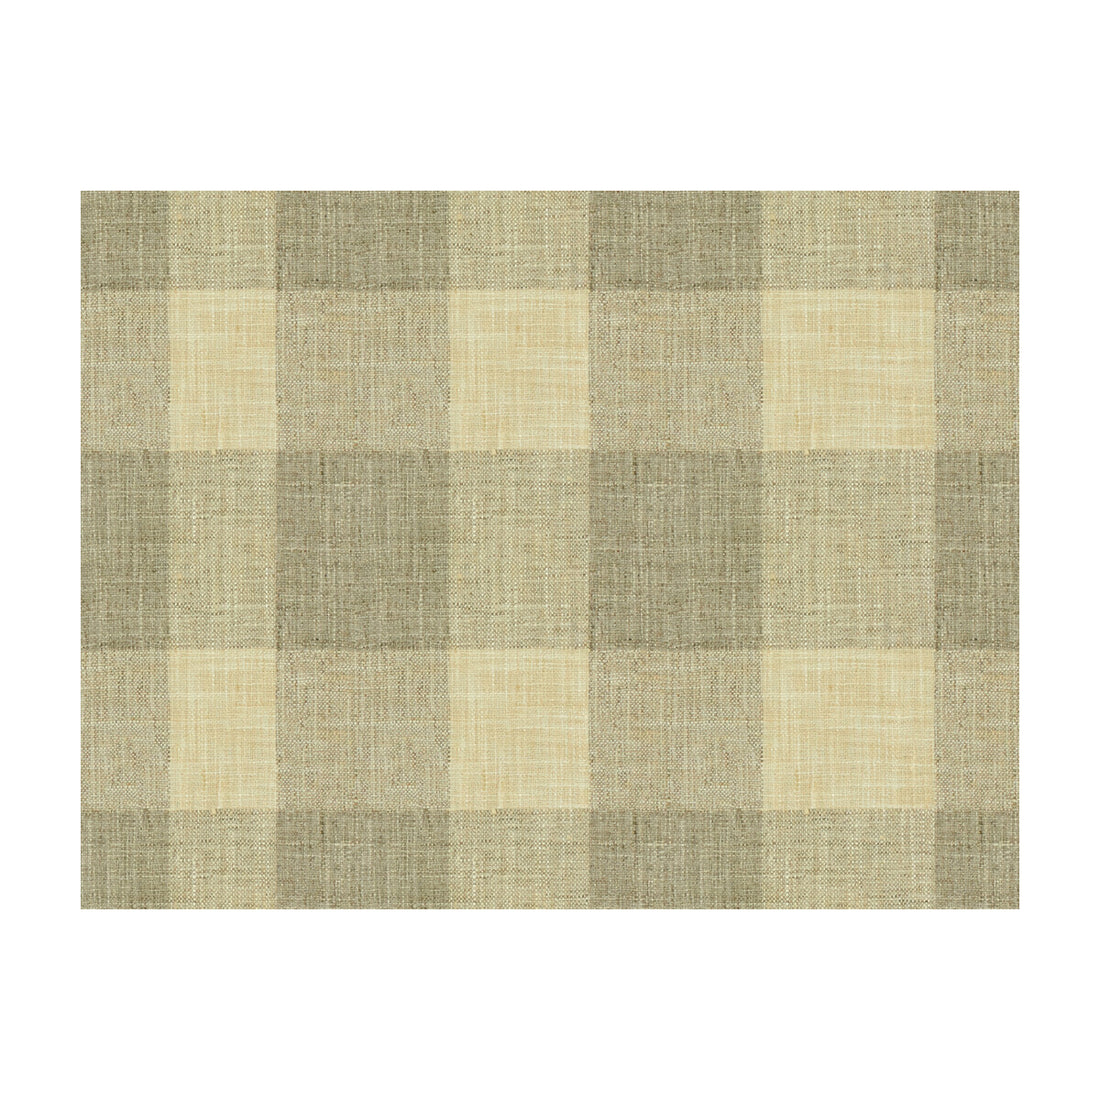 Kravet Basics fabric in 34090-1611 color - pattern 34090.1611.0 - by Kravet Basics in the Bungalow Chic II collection